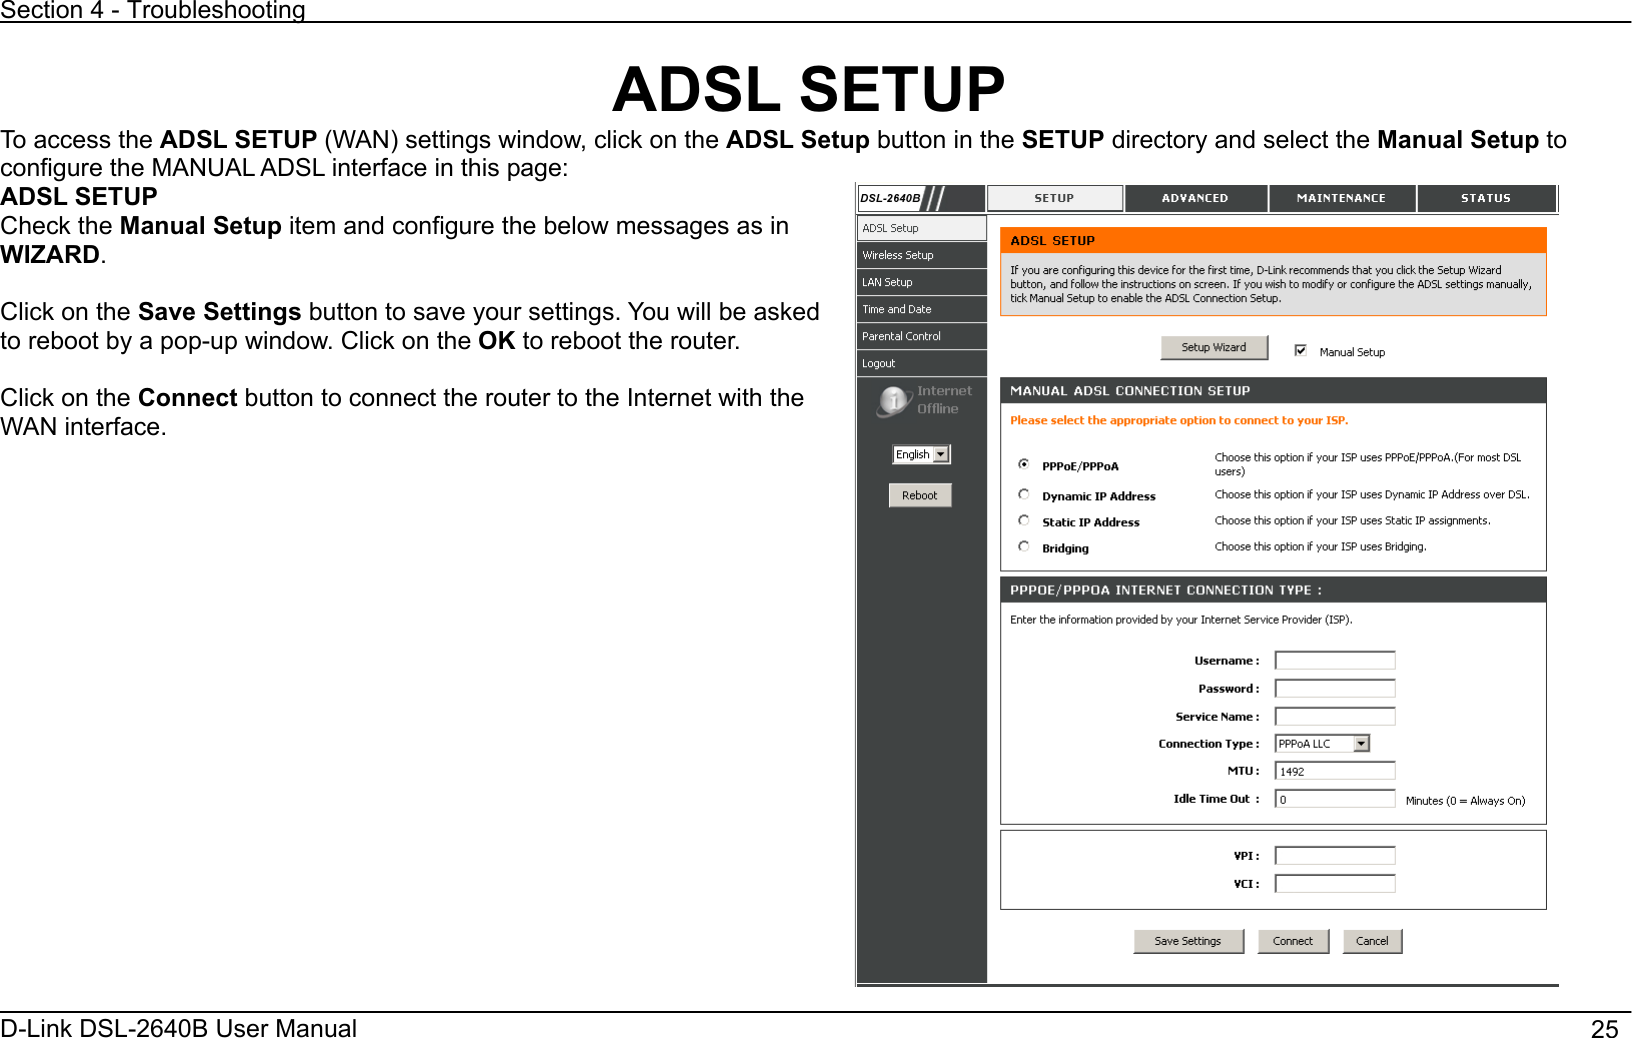 Section 4 - Troubleshooting D-Link DSL-2640B User Manual                                       25ADSL SETUP To access the ADSL SETUP (WAN) settings window, click on the ADSL Setup button in the SETUP directory and select the Manual Setup to configure the MANUAL ADSL interface in this page: ADSL SETUP Check the Manual Setup item and configure the below messages as in WIZARD.Click on the Save Settings button to save your settings. You will be asked to reboot by a pop-up window. Click on the OK to reboot the router. Click on the Connect button to connect the router to the Internet with the WAN interface. 